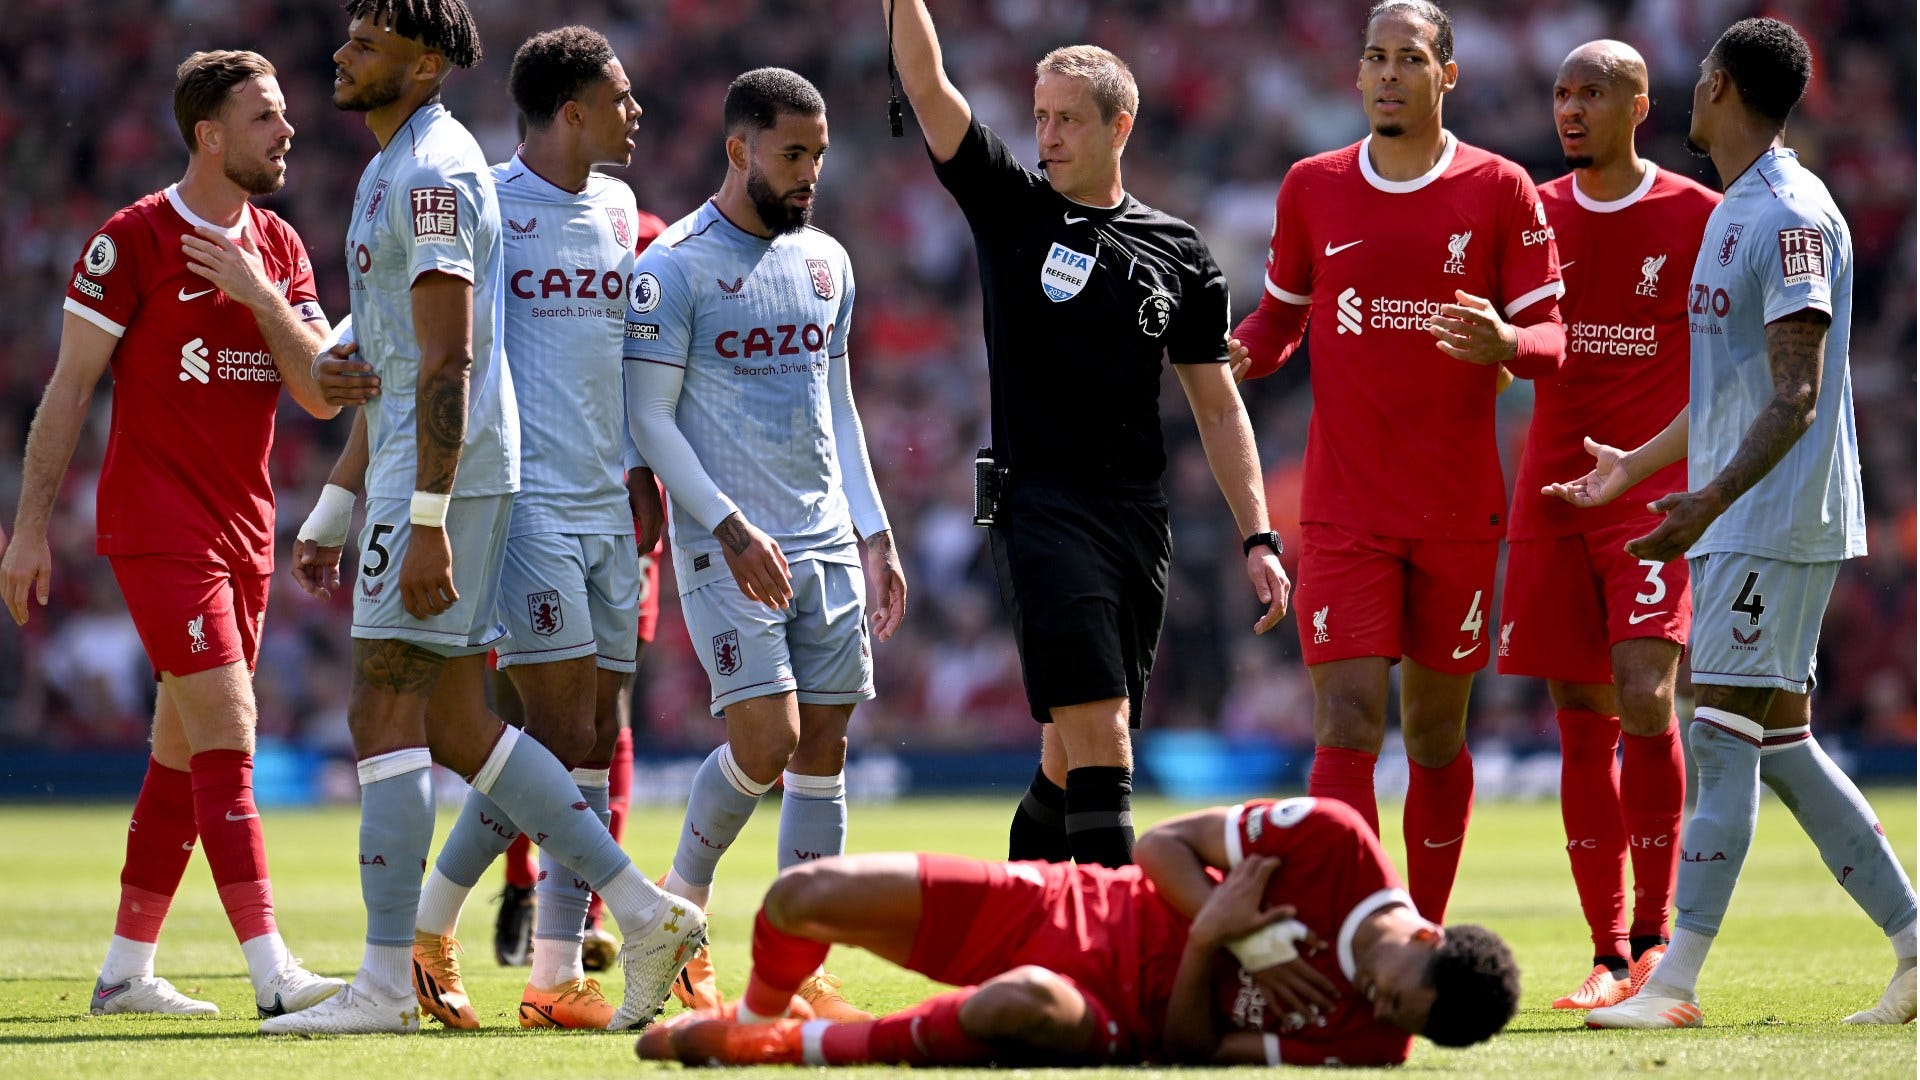 Liverpool left fuming! Reds contact PGMOL over controversial decisions in Aston Villa draw that left Champions League dream in tatters Goal US